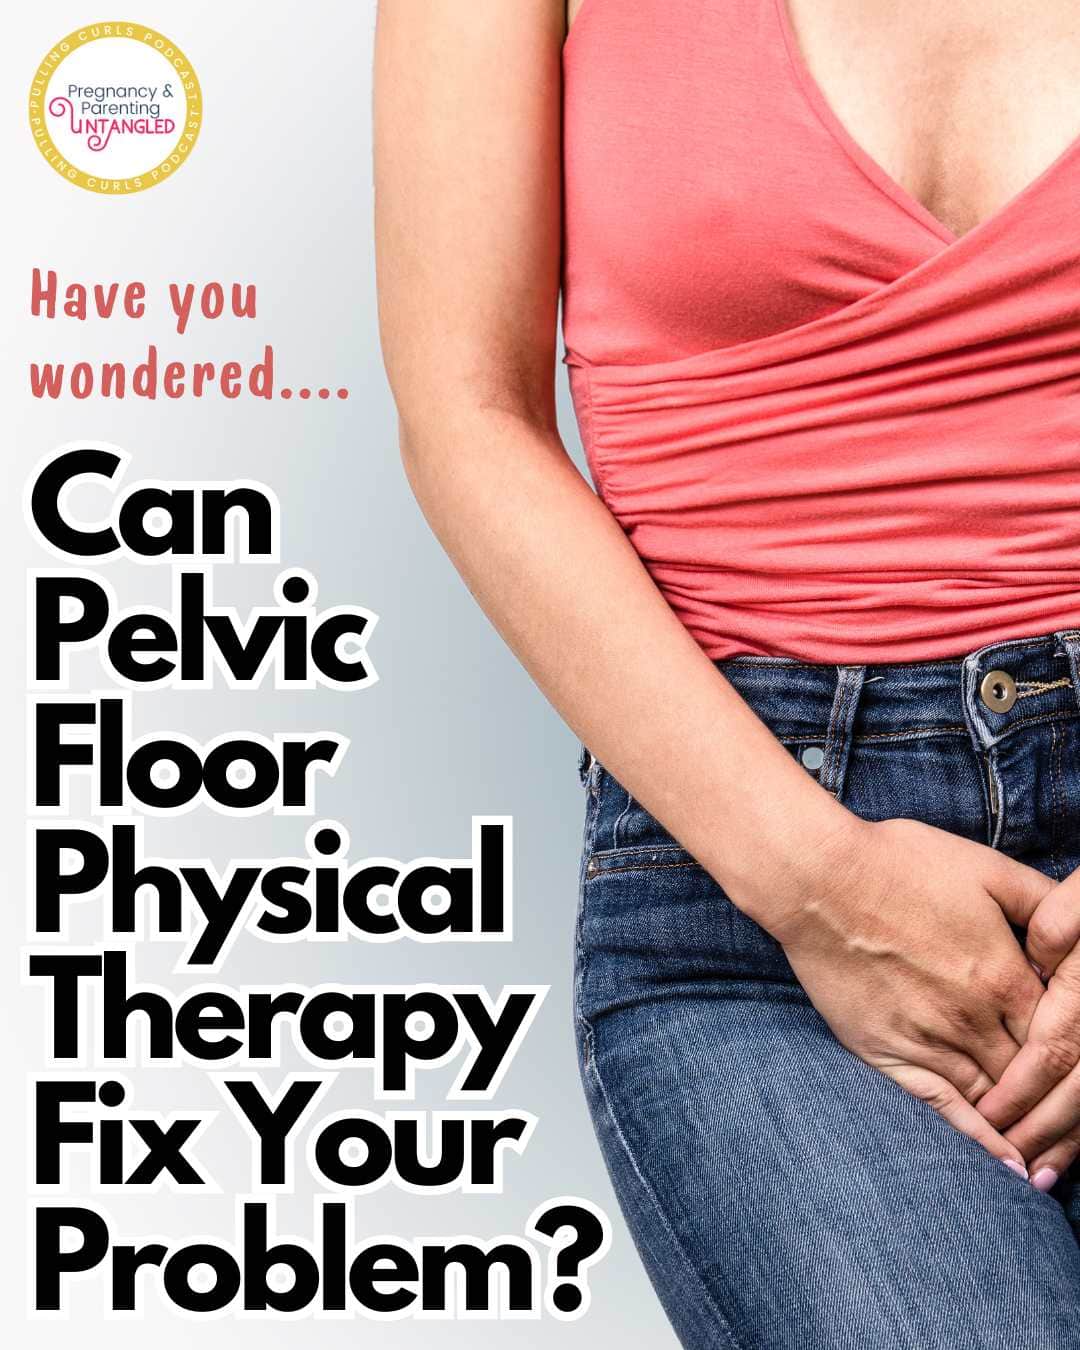 Learn about pelvic floor physical therapy, urge incontinence, and hip pain management in this informative episode. Discover how to be patient with yourself and your bladder, and try different approaches to find relief. Join the conversation and share your experiences over on Instagram. Stay tuned for upcoming episodes on charting for nurses and doctors and expert Disneyland tips. via @pullingcurls